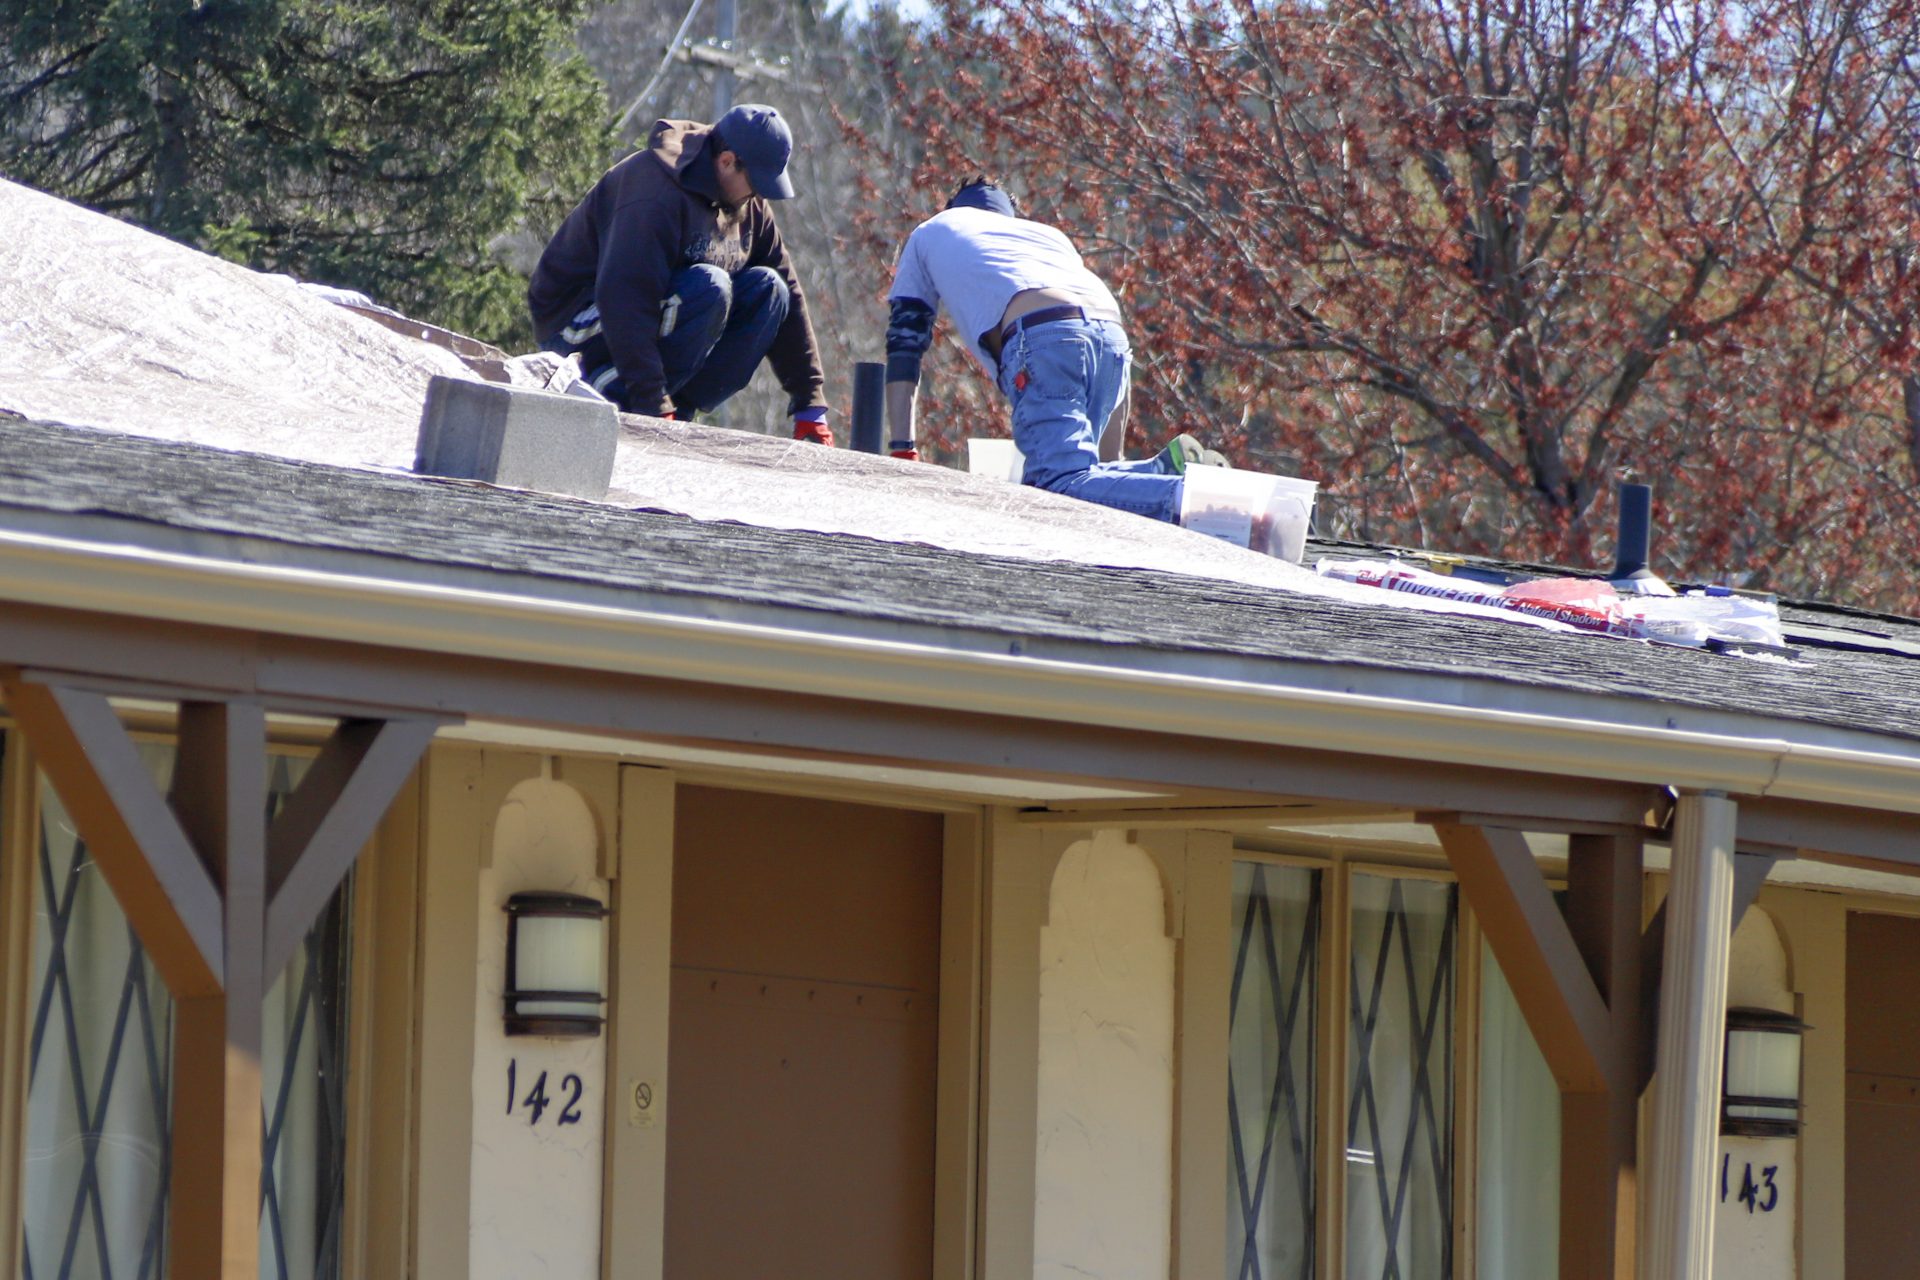 Roofers work on repairs at a motel in Greensburg, Pa. Thursday, April 2, 2020.